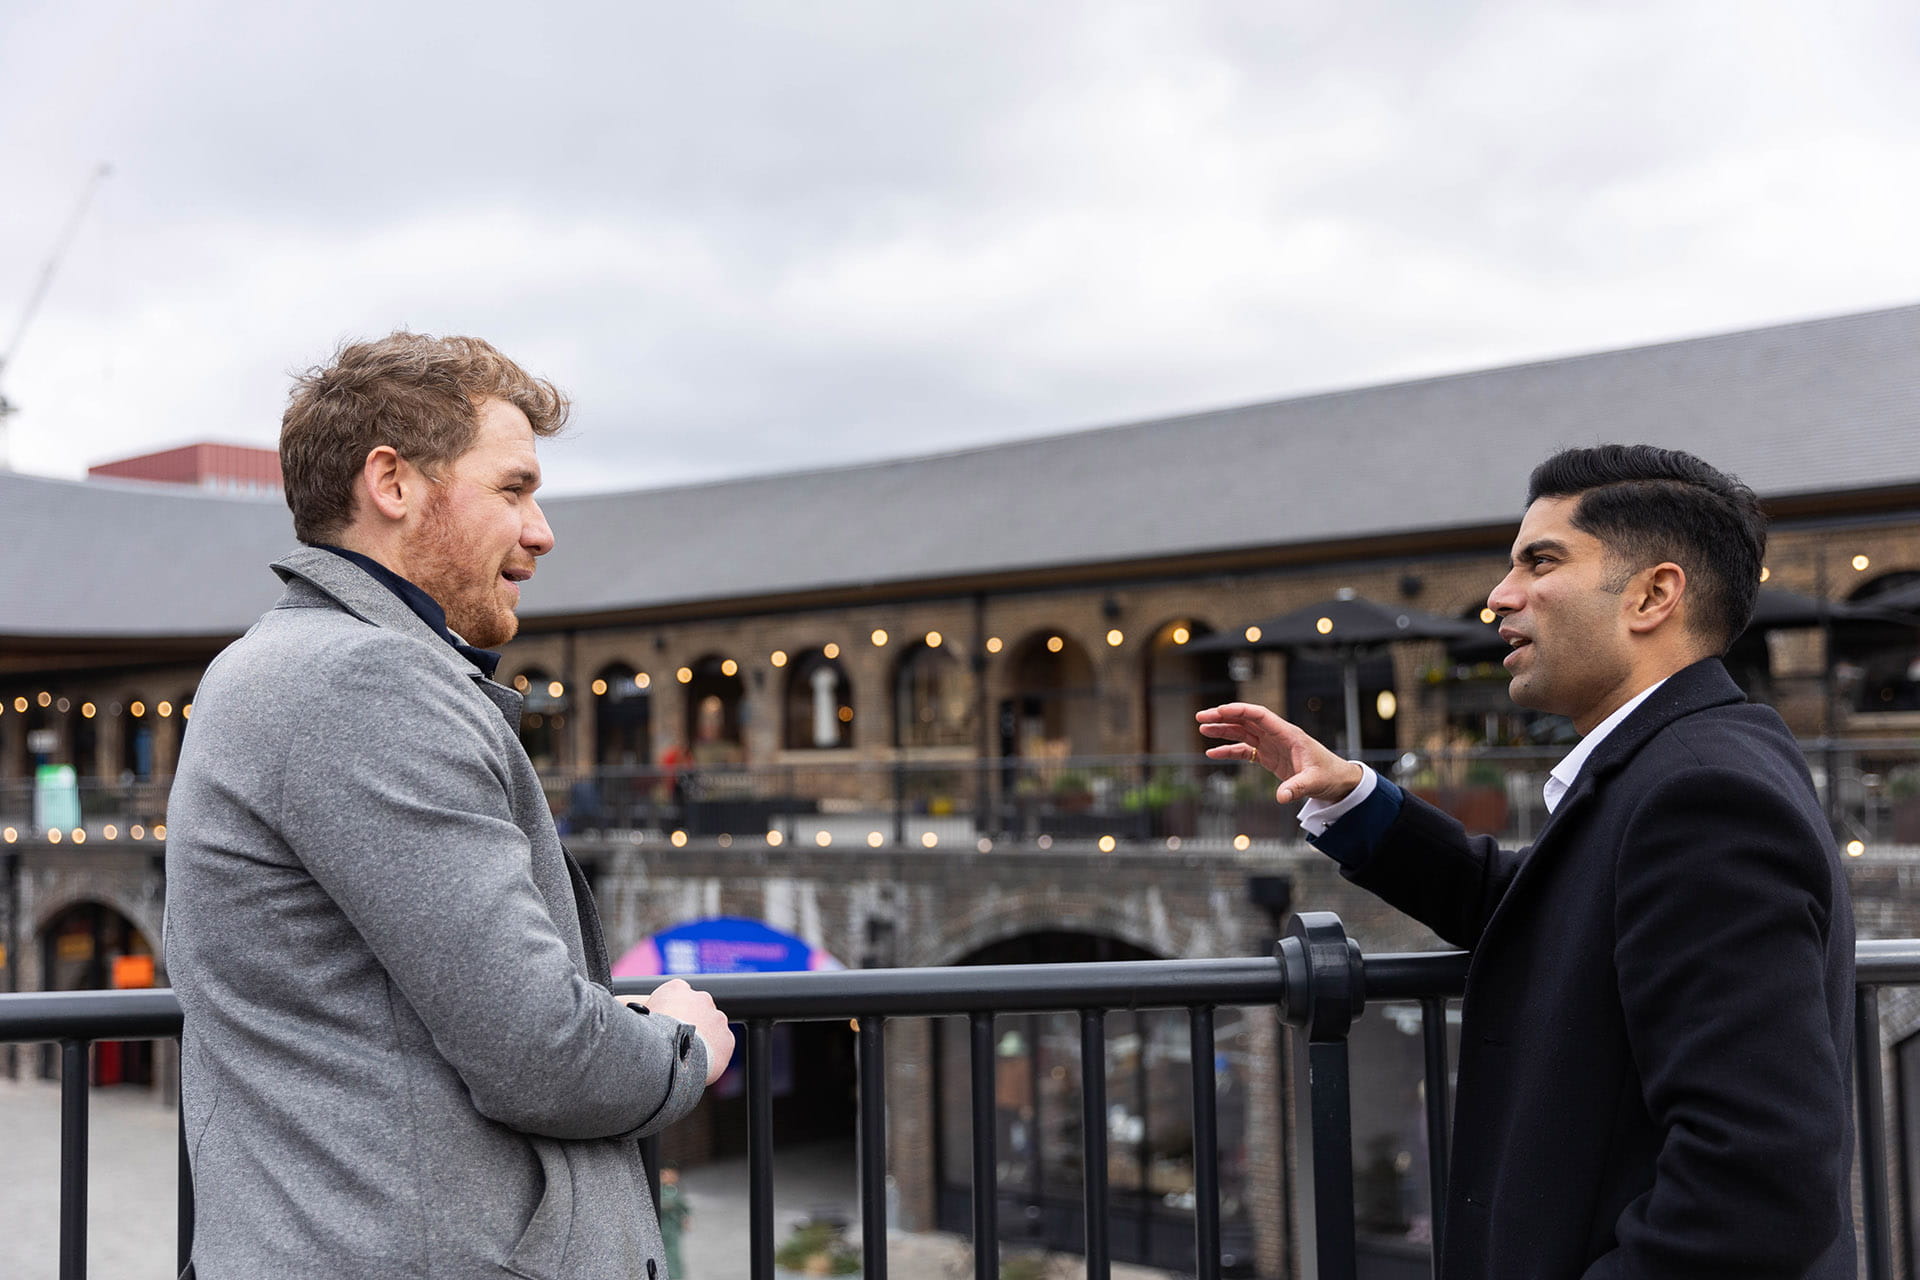 ISG employees Harsha Javvaji and Oliver Day in conversation at Kings cross granary square